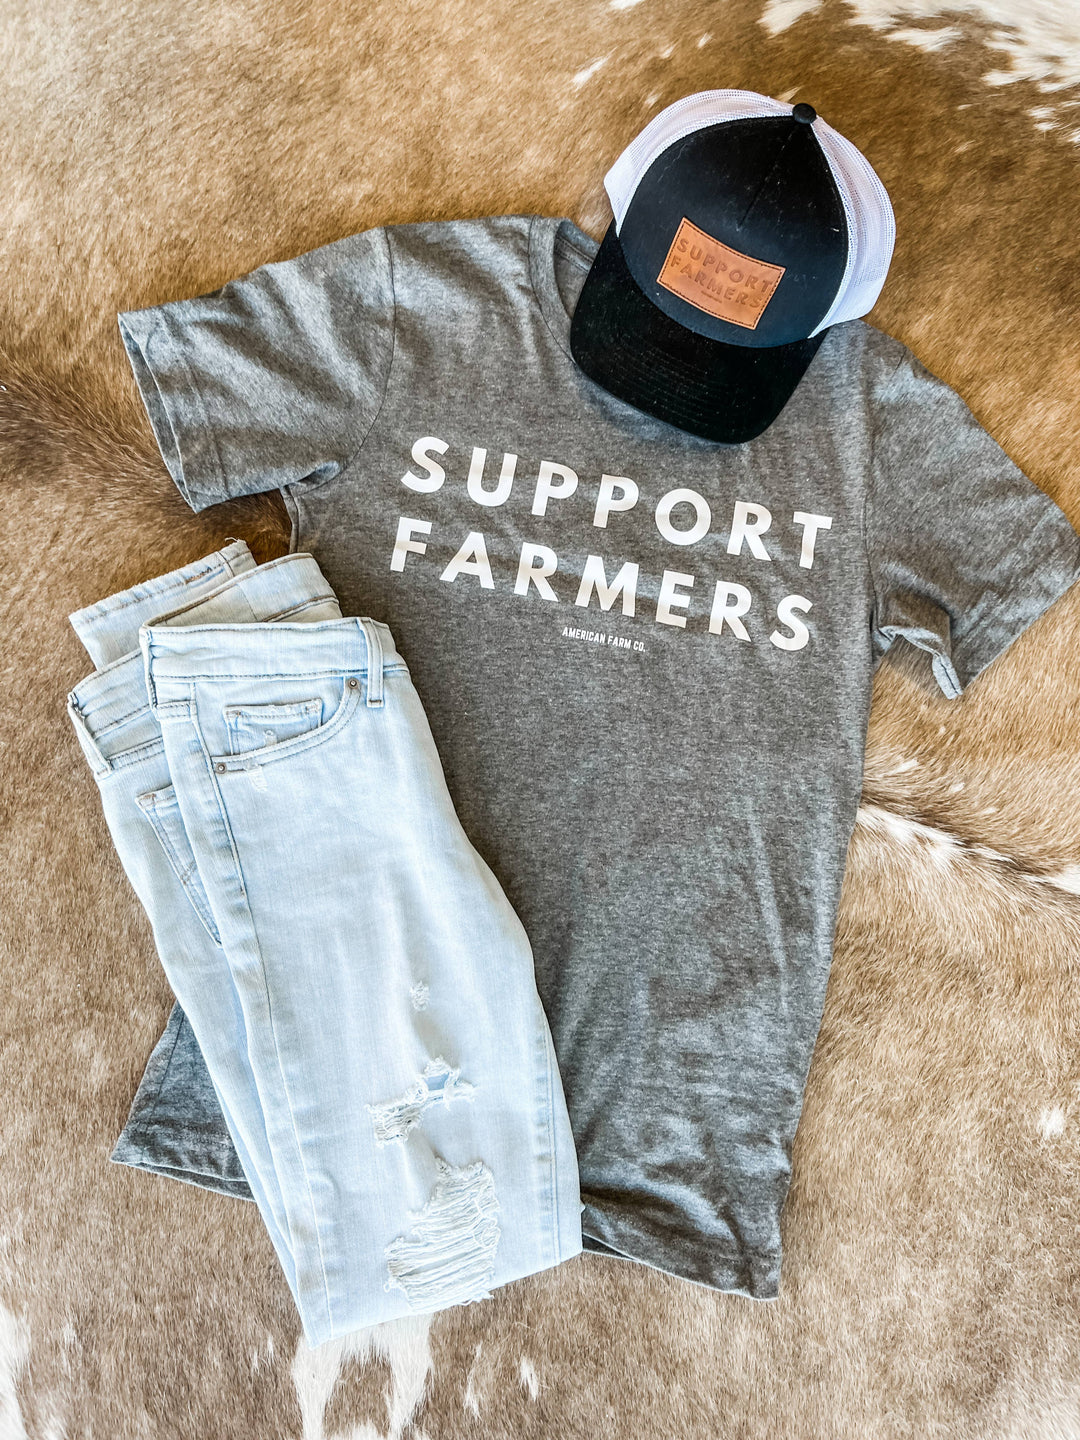 Western Support Farmers Grey Graphic Tee